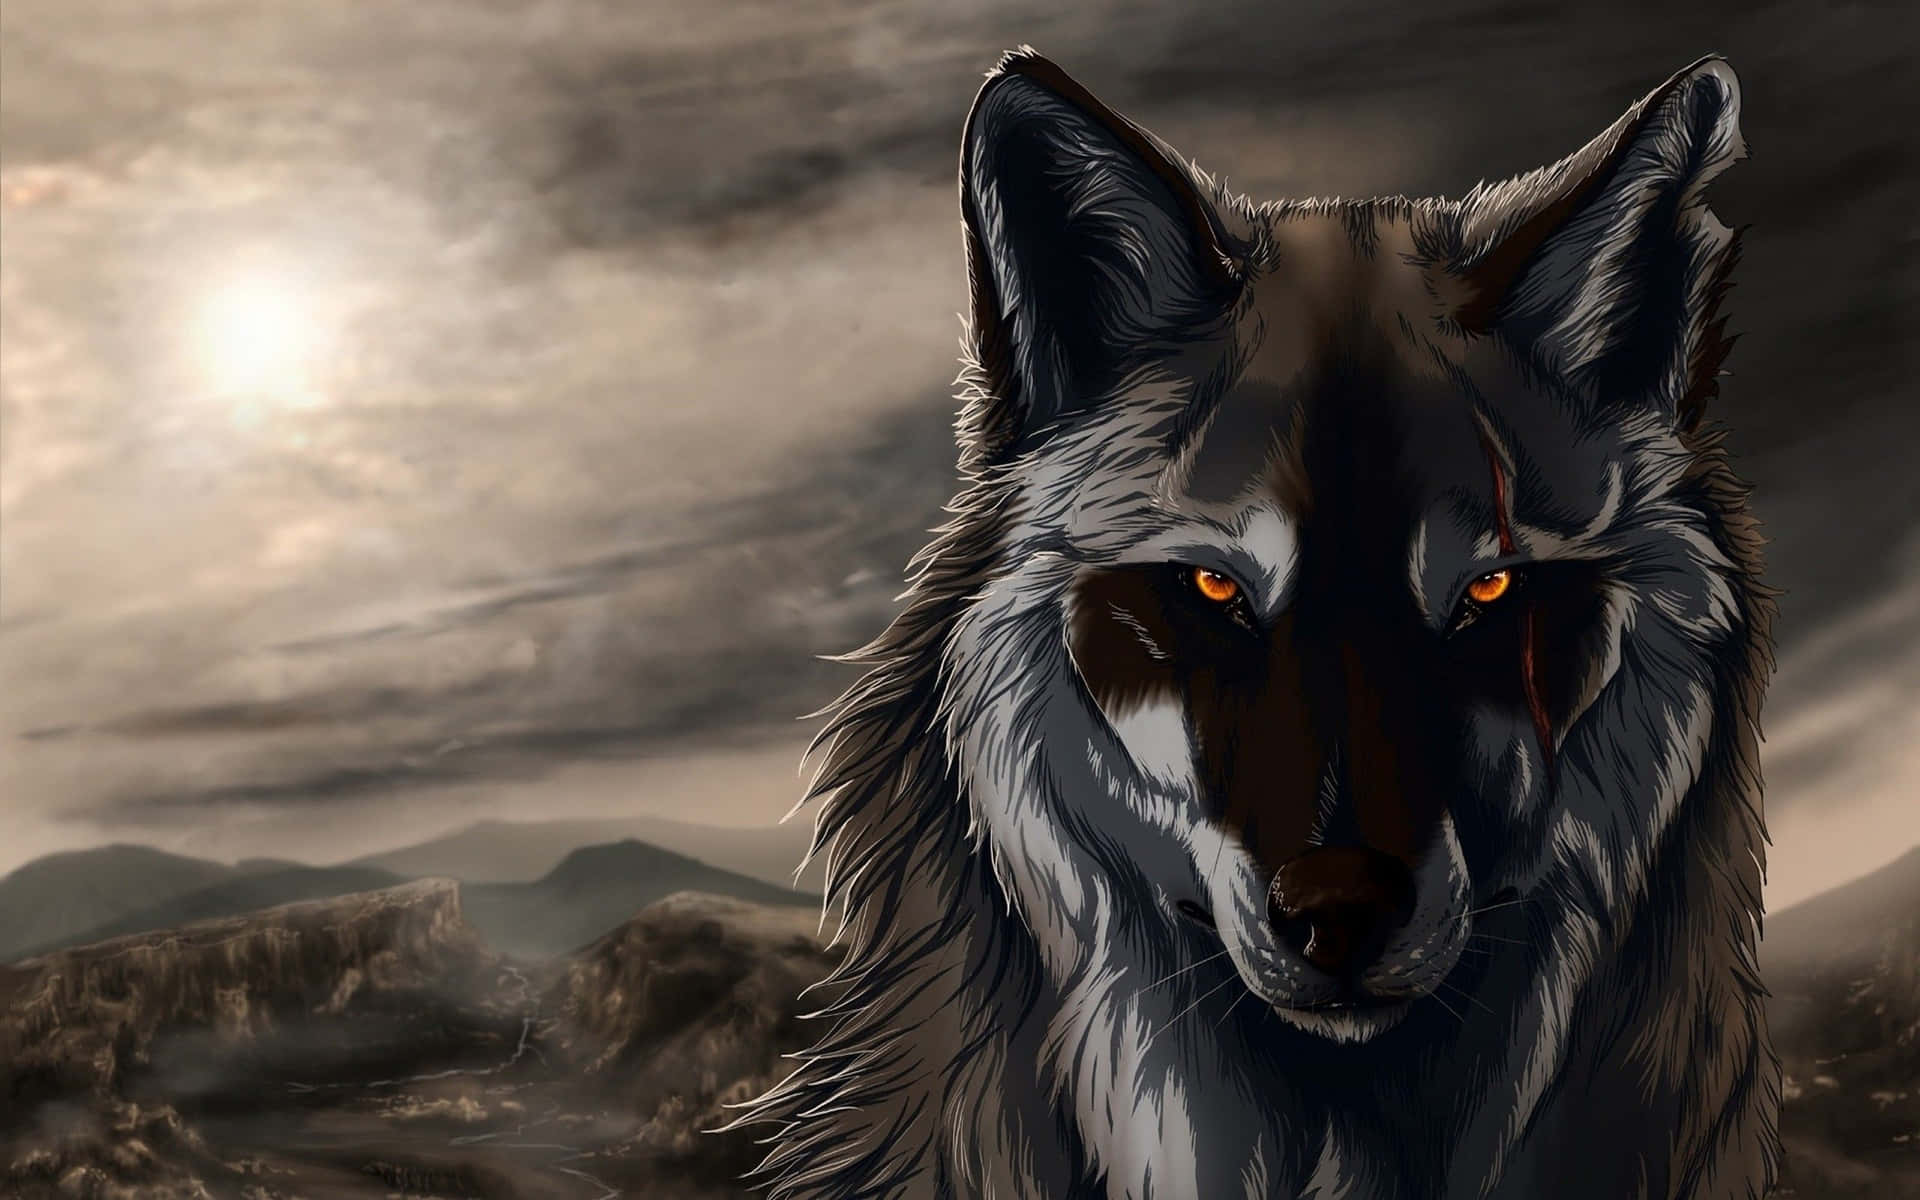 Explore the Wild Side of Anime with this Amazing Wolf Art Wallpaper